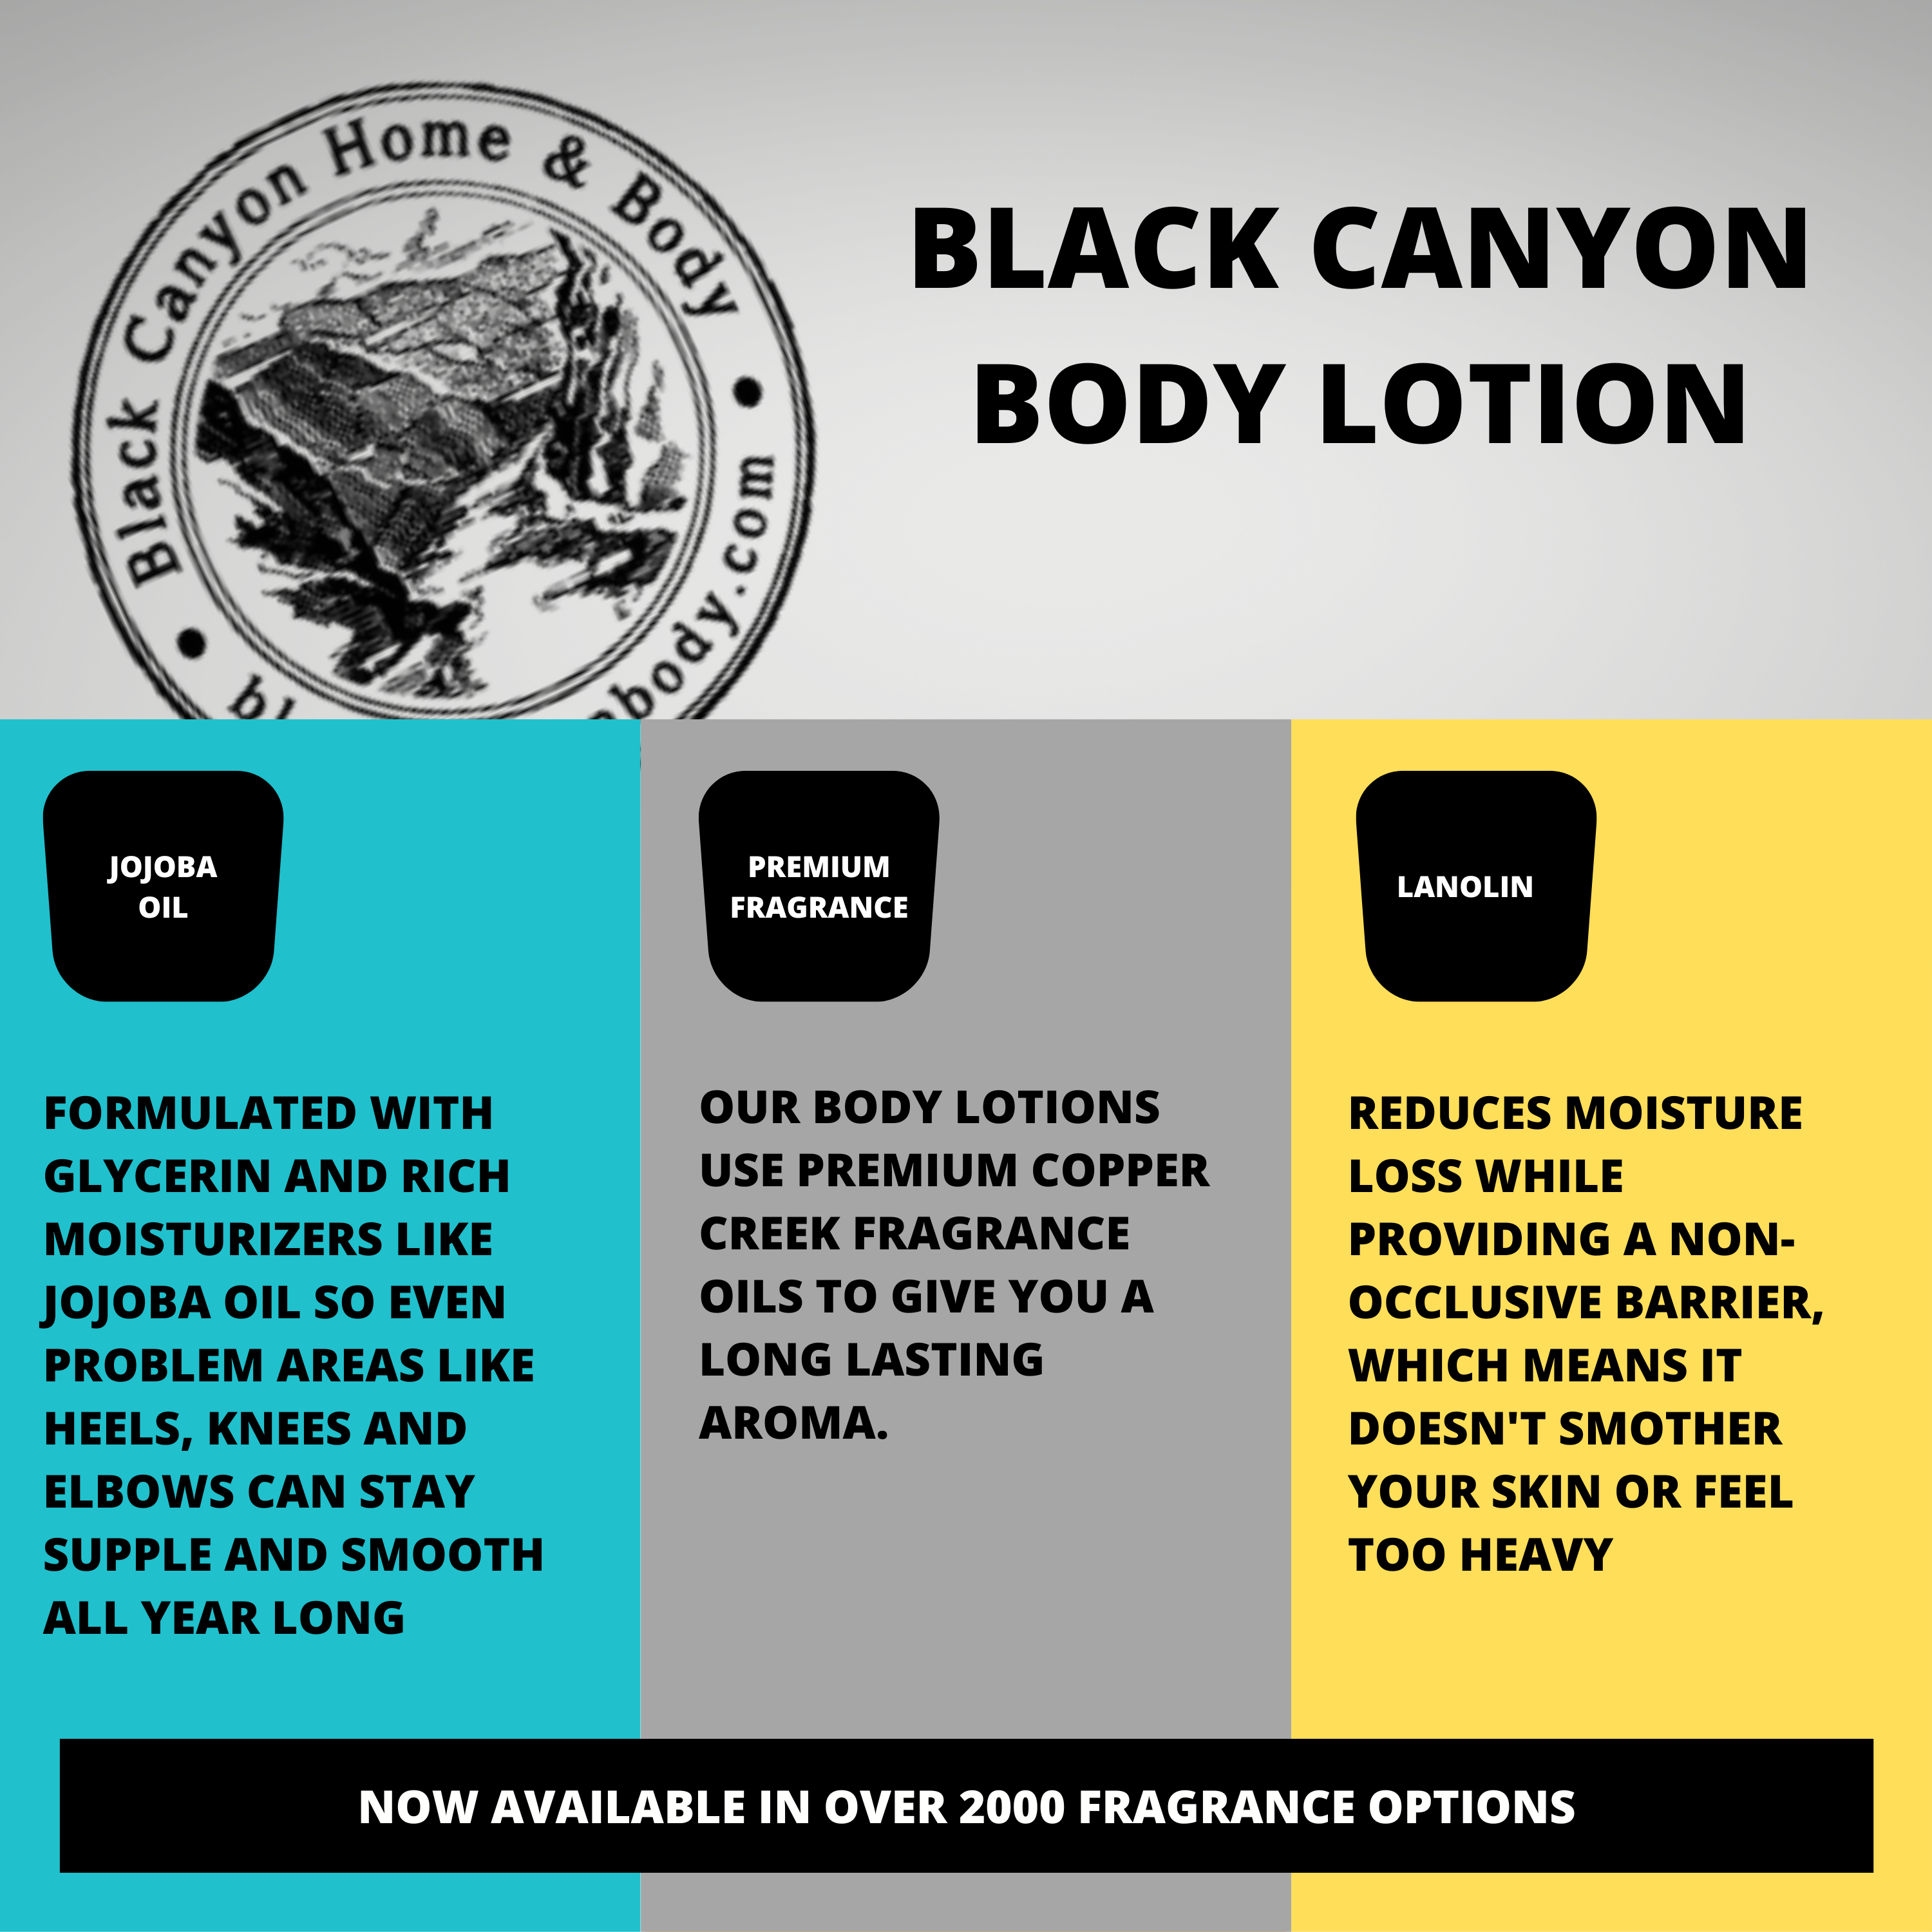 Black Canyon Watermelon Candy Scented Luxury Body Lotion with Lanolin and Jojoba Oil